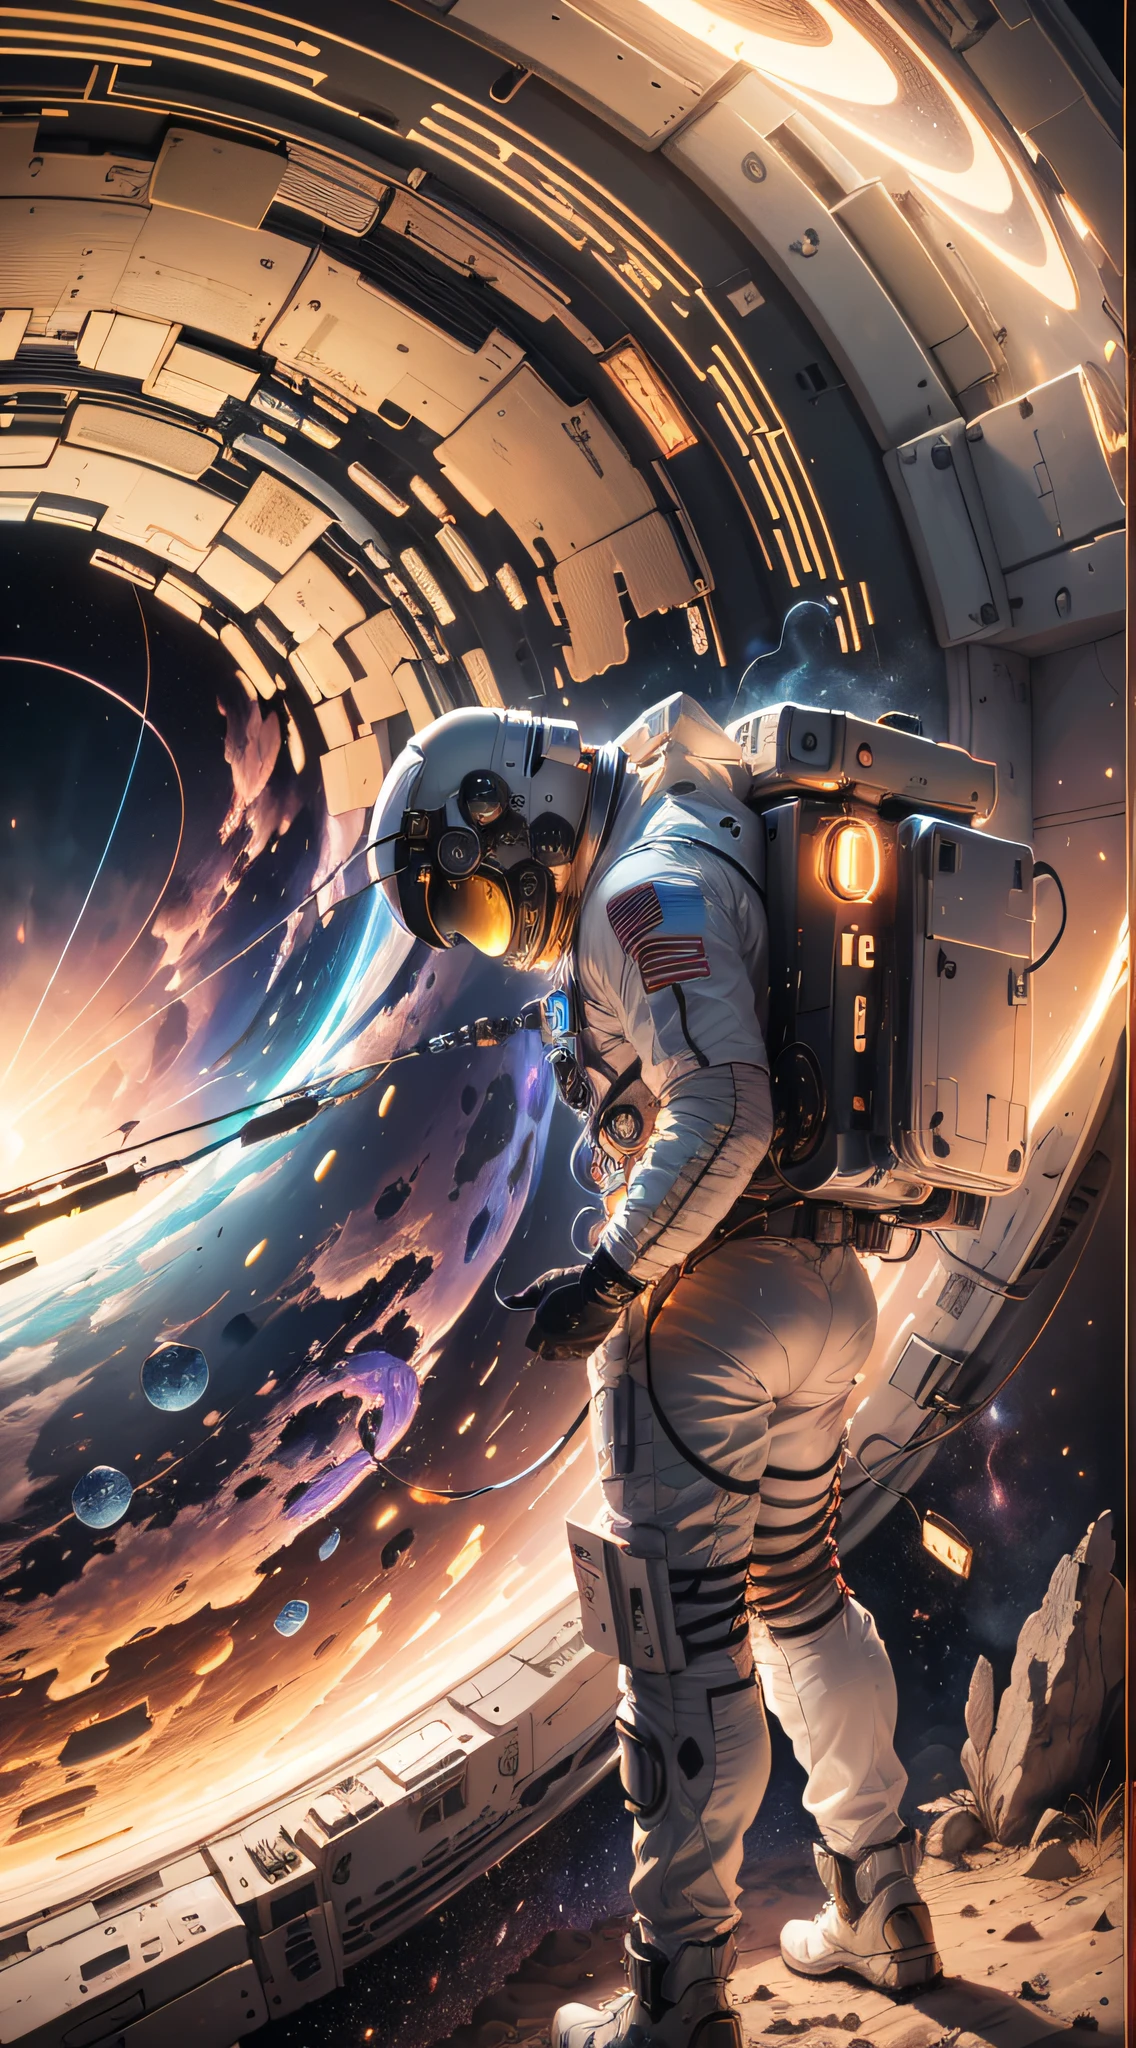 ((Masterpiece)), (Best Quality)), 8K, high detail, hyper-detail, the painting depicts a scene of breathtaking magnificent spatial images. The picture shows a man wearing a spacesuit, facing back, looking at a red glowing planet in space. The scenes are extremely detailed and the clarity is extraordinary, capturing every intricate detail of the panorama.